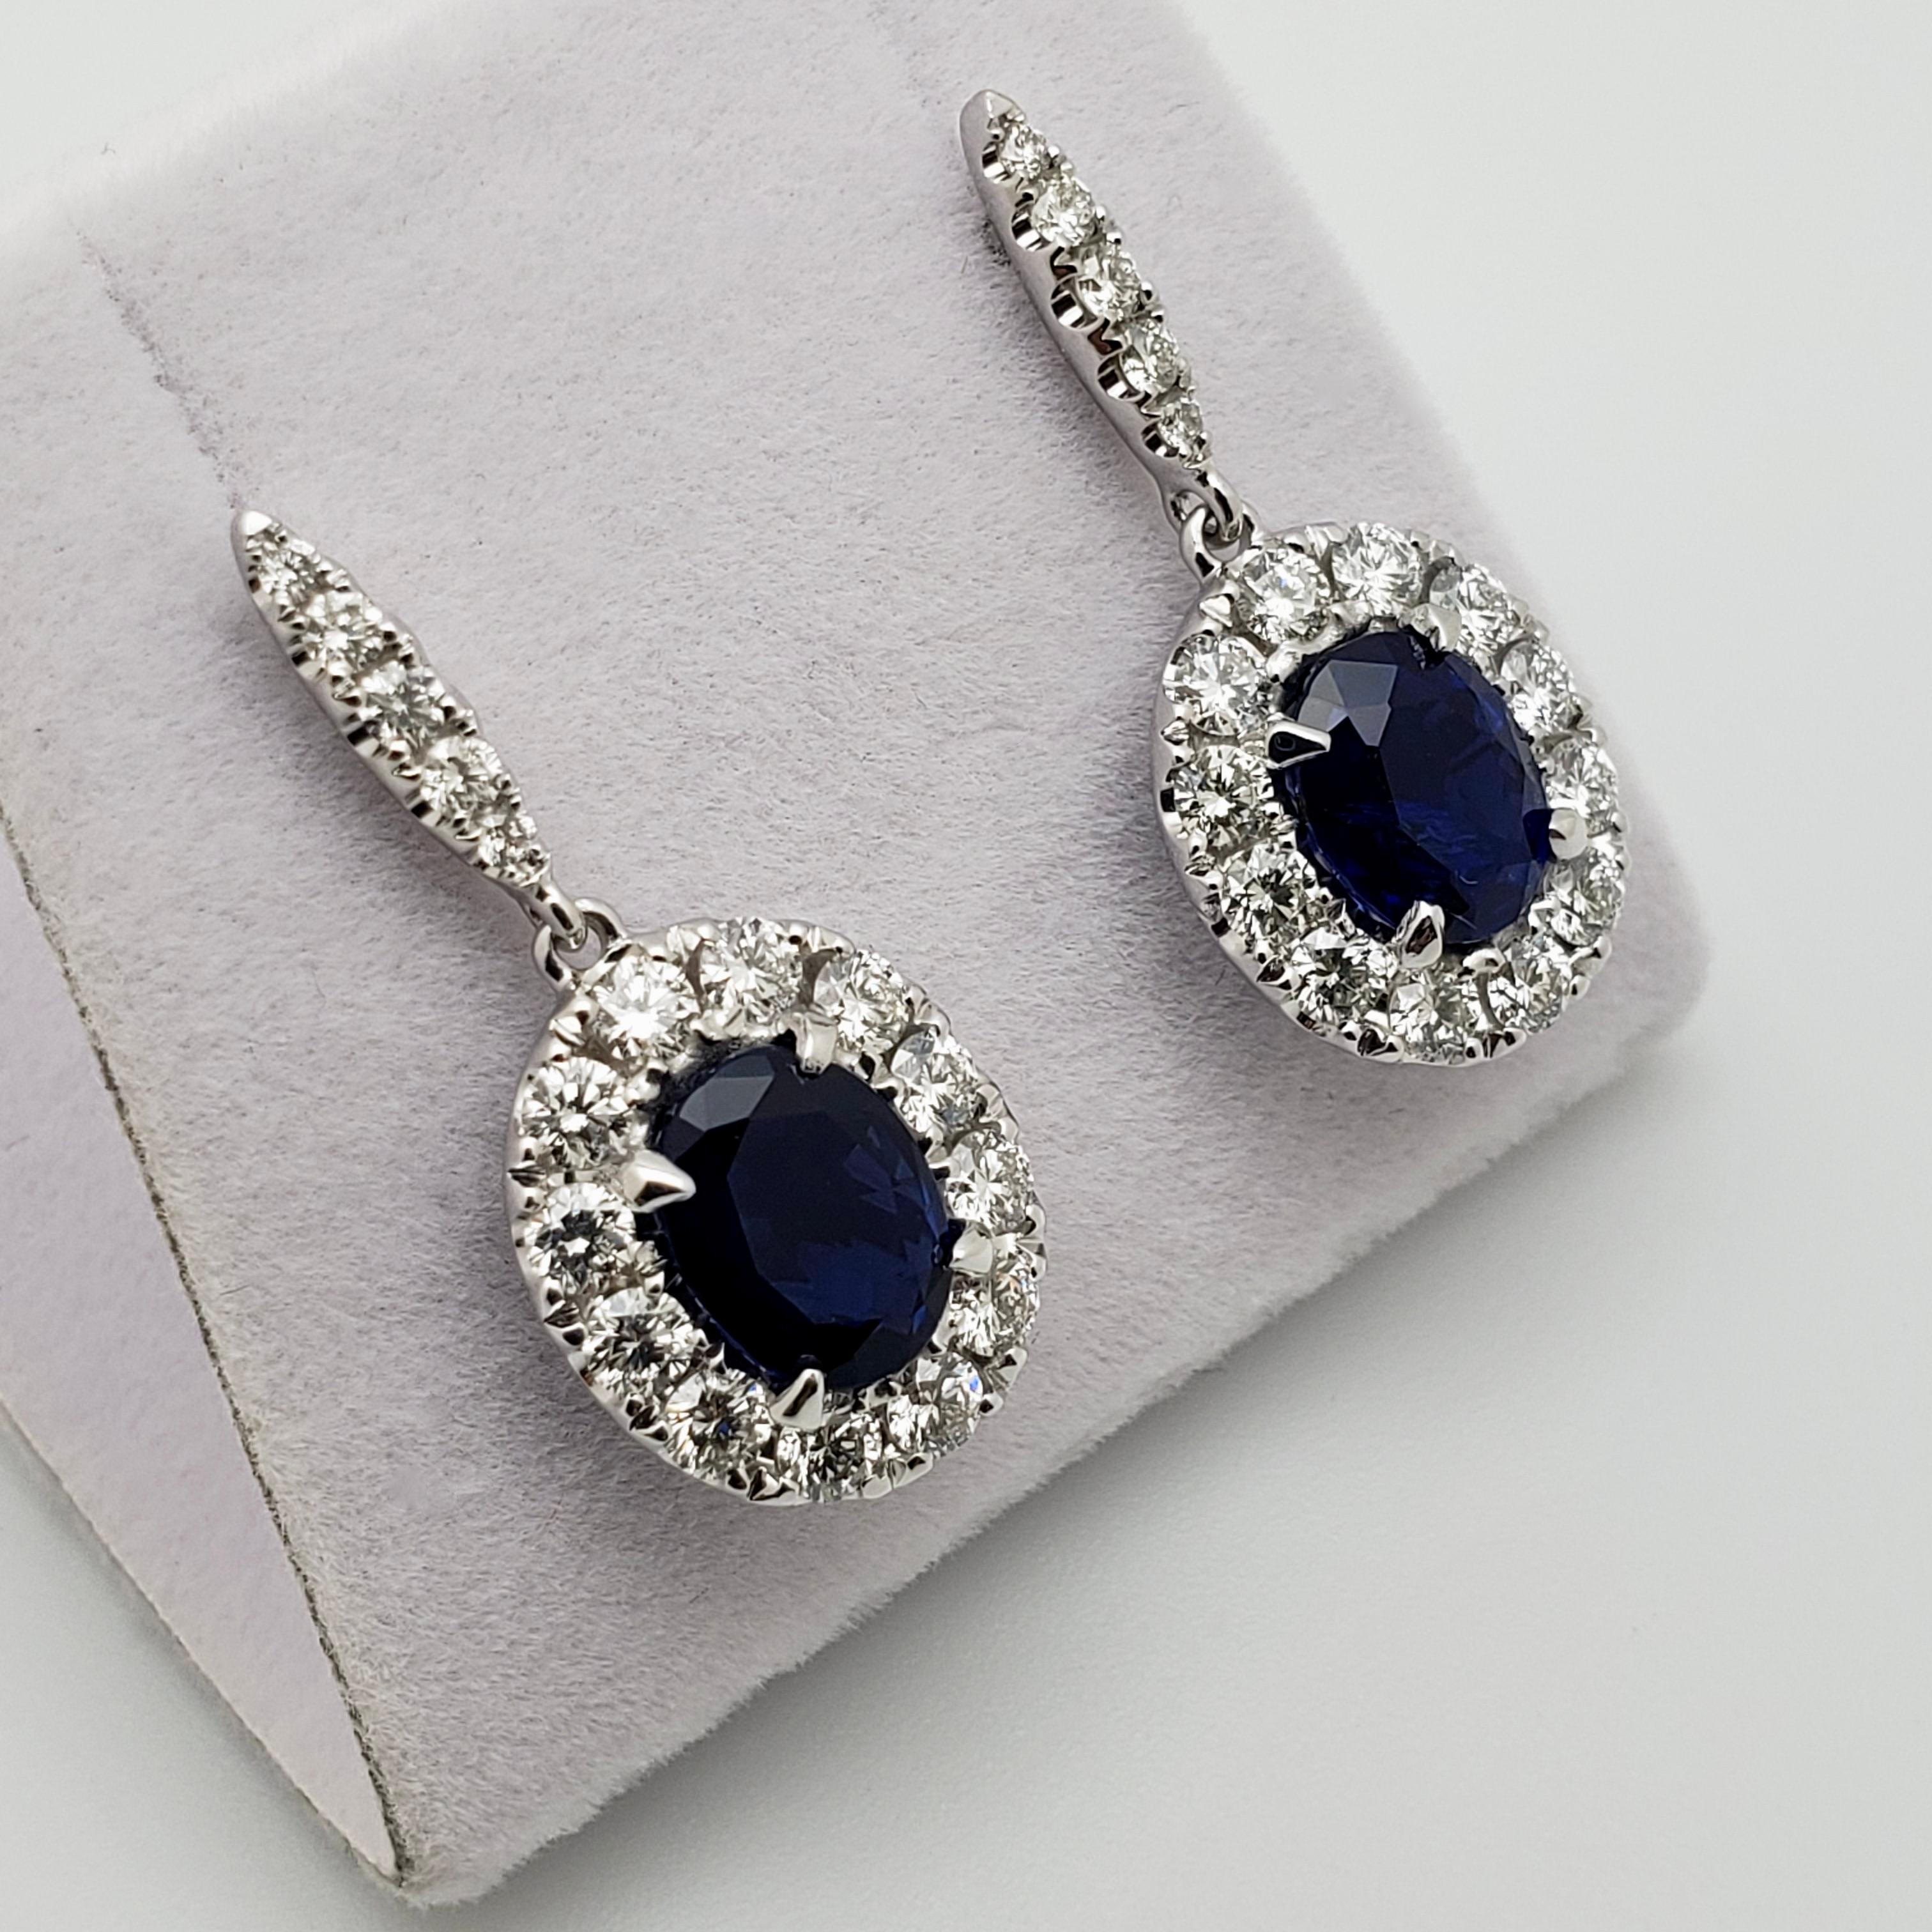 An extraordinary pair of 18K white gold diamond and sapphire earrings. Set with two natural unheated oval cut midnight-blue sapphires, accompanied by a GIA Certificate stating natural corundum and no treatment (no indications of heating) report